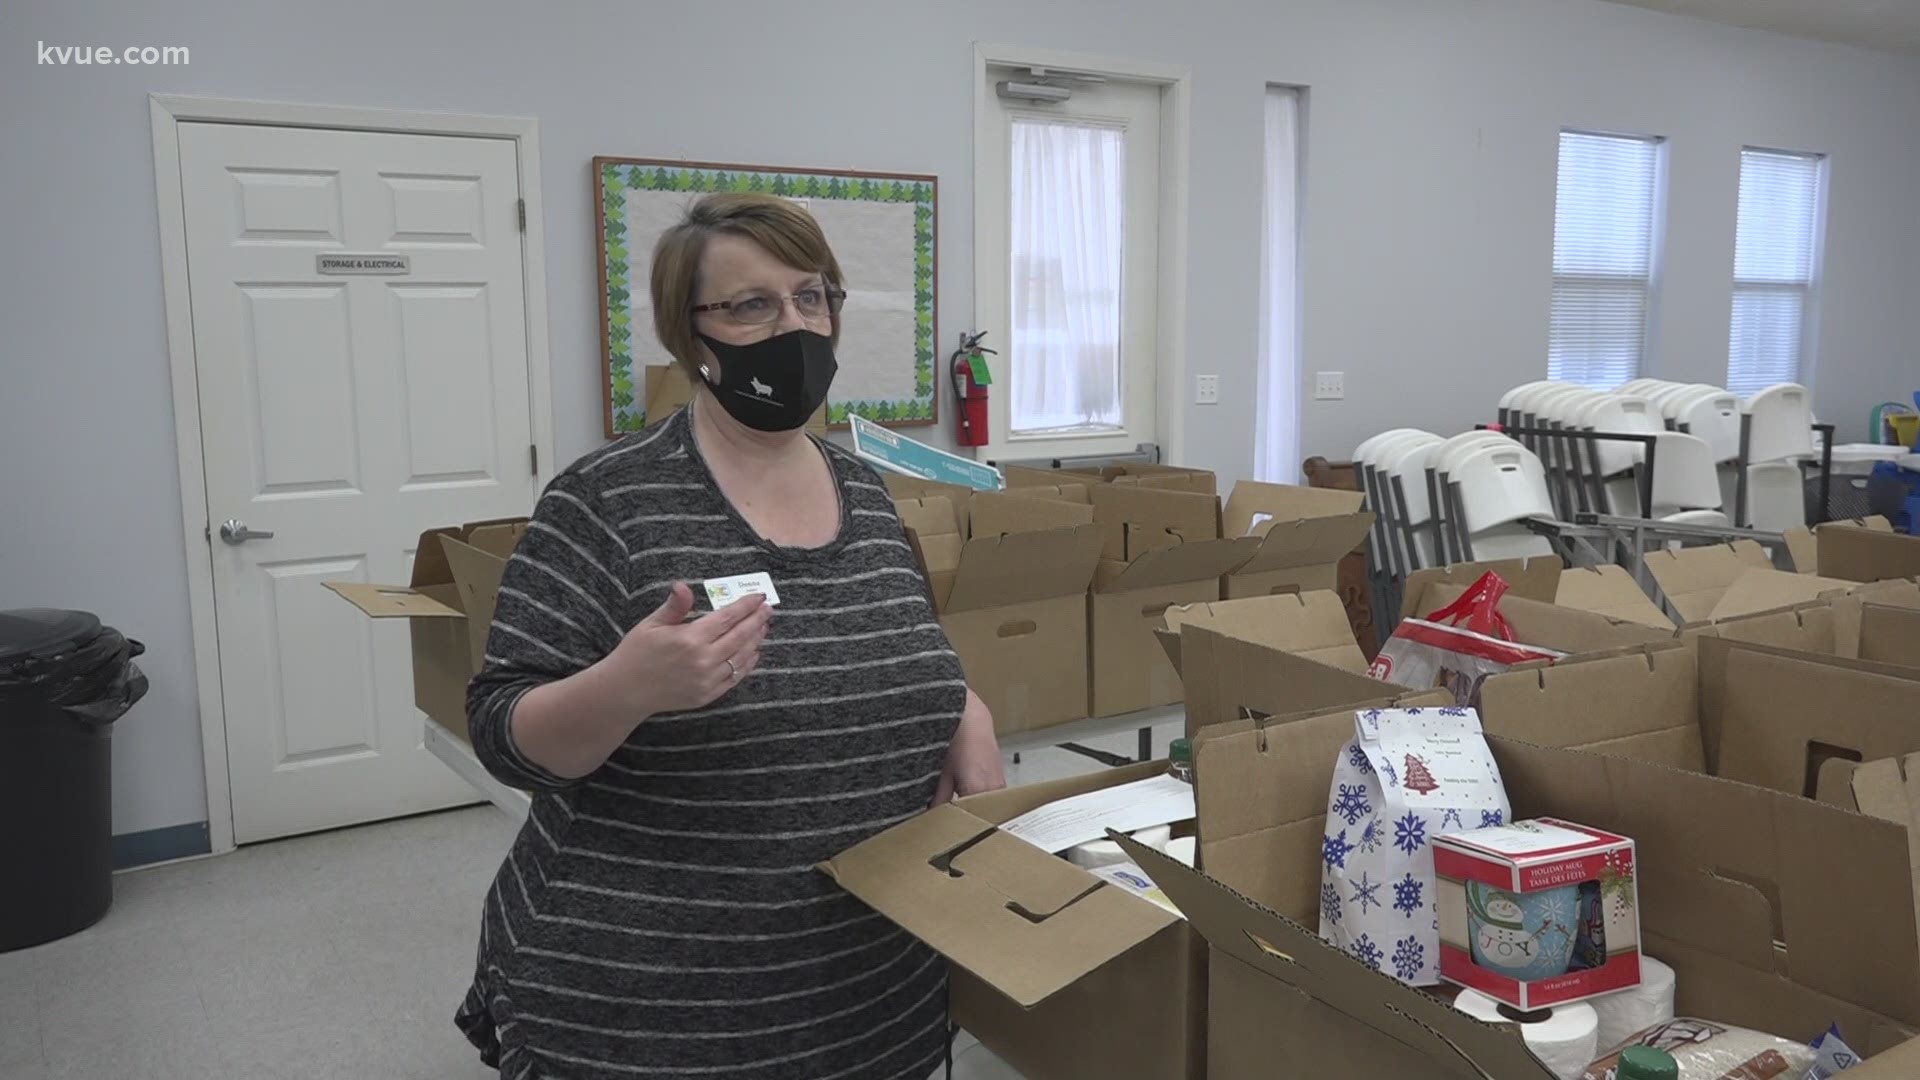 During the holidays, nonprofits are busy helping struggling families amid the pandemic. KVUE spoke with some people helping their neighbors this holiday season.